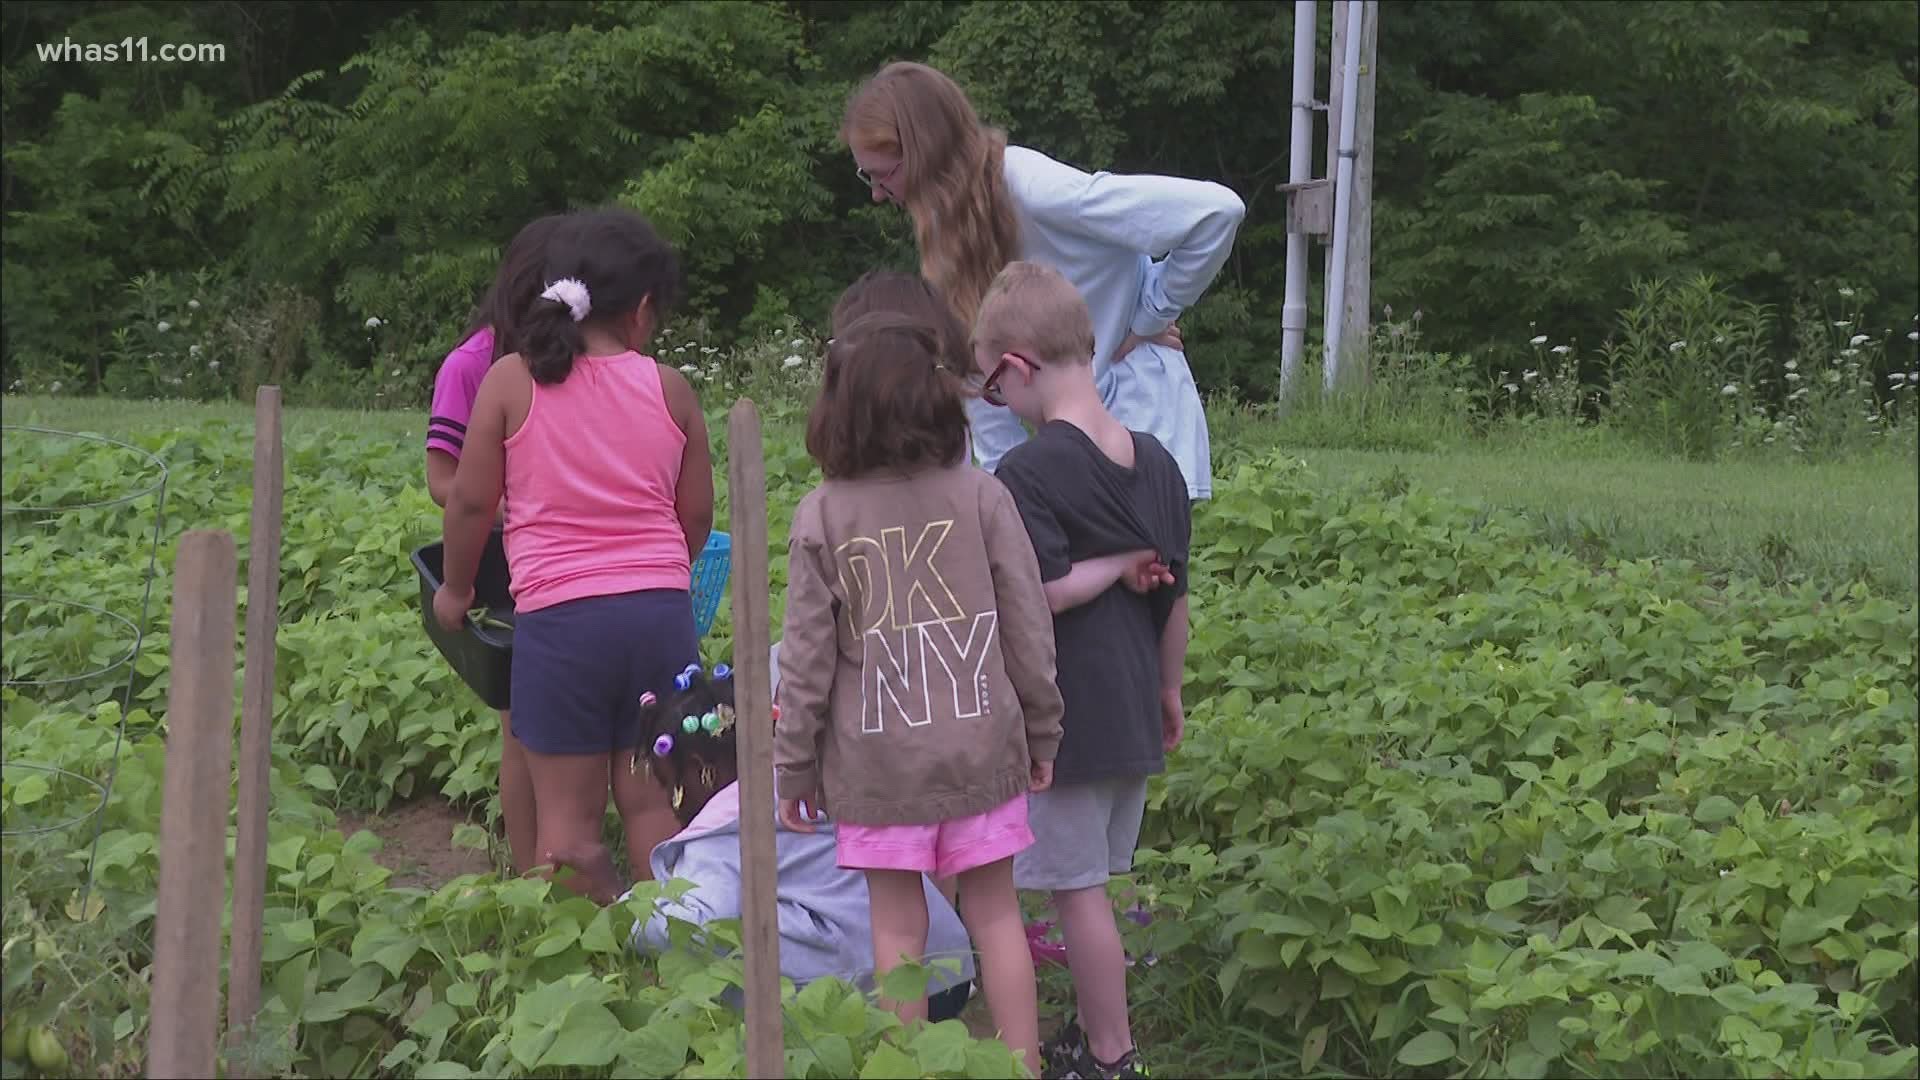 Students who attend Wright Elementary are using gardening as a unique way to prevent the summer slide.